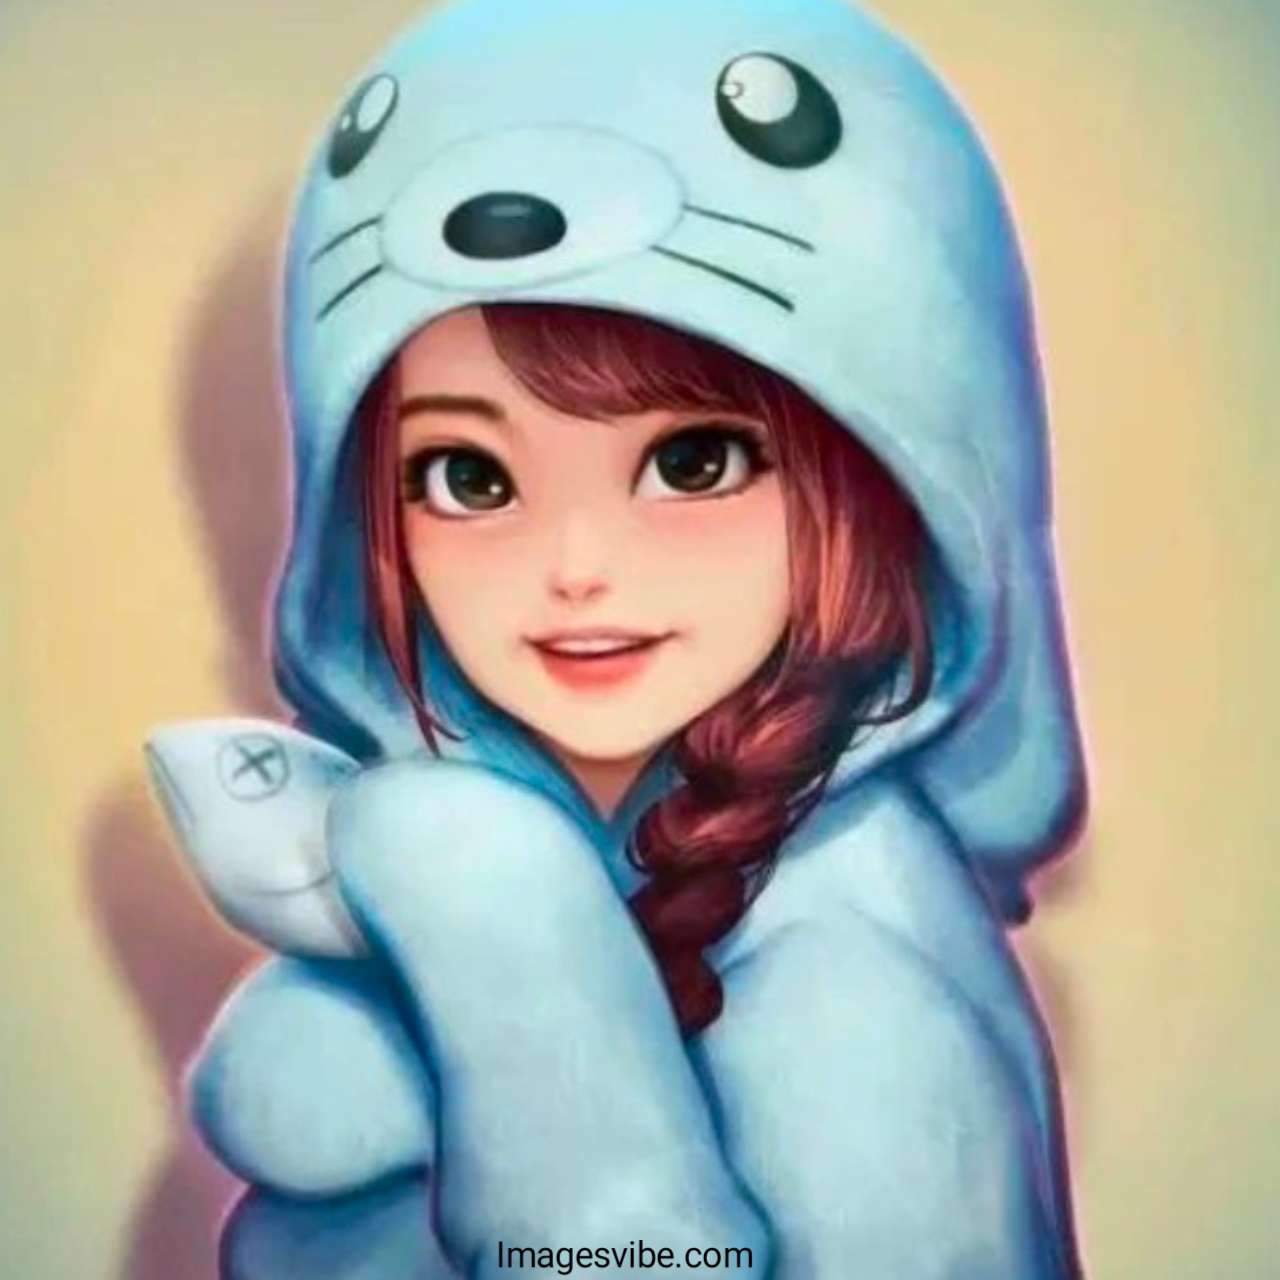 Best 30+ Cute Cartoon Images For Girl & Wallpaper pics - Images Vibe